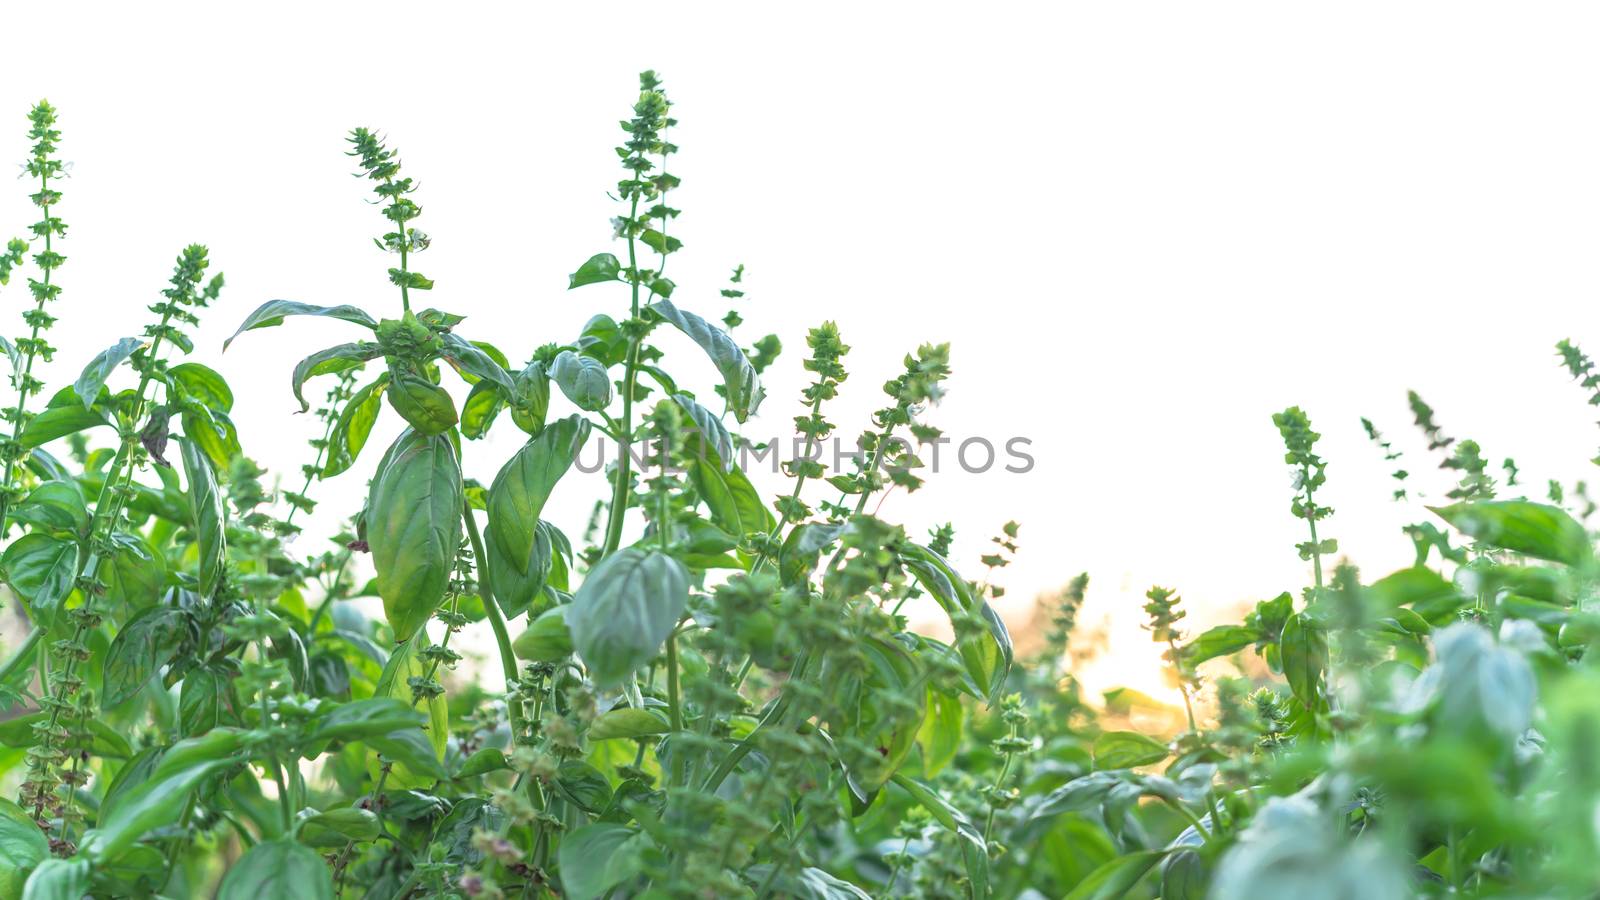 Blooming sweet basil plants with nature backlit isolated on white background by trongnguyen